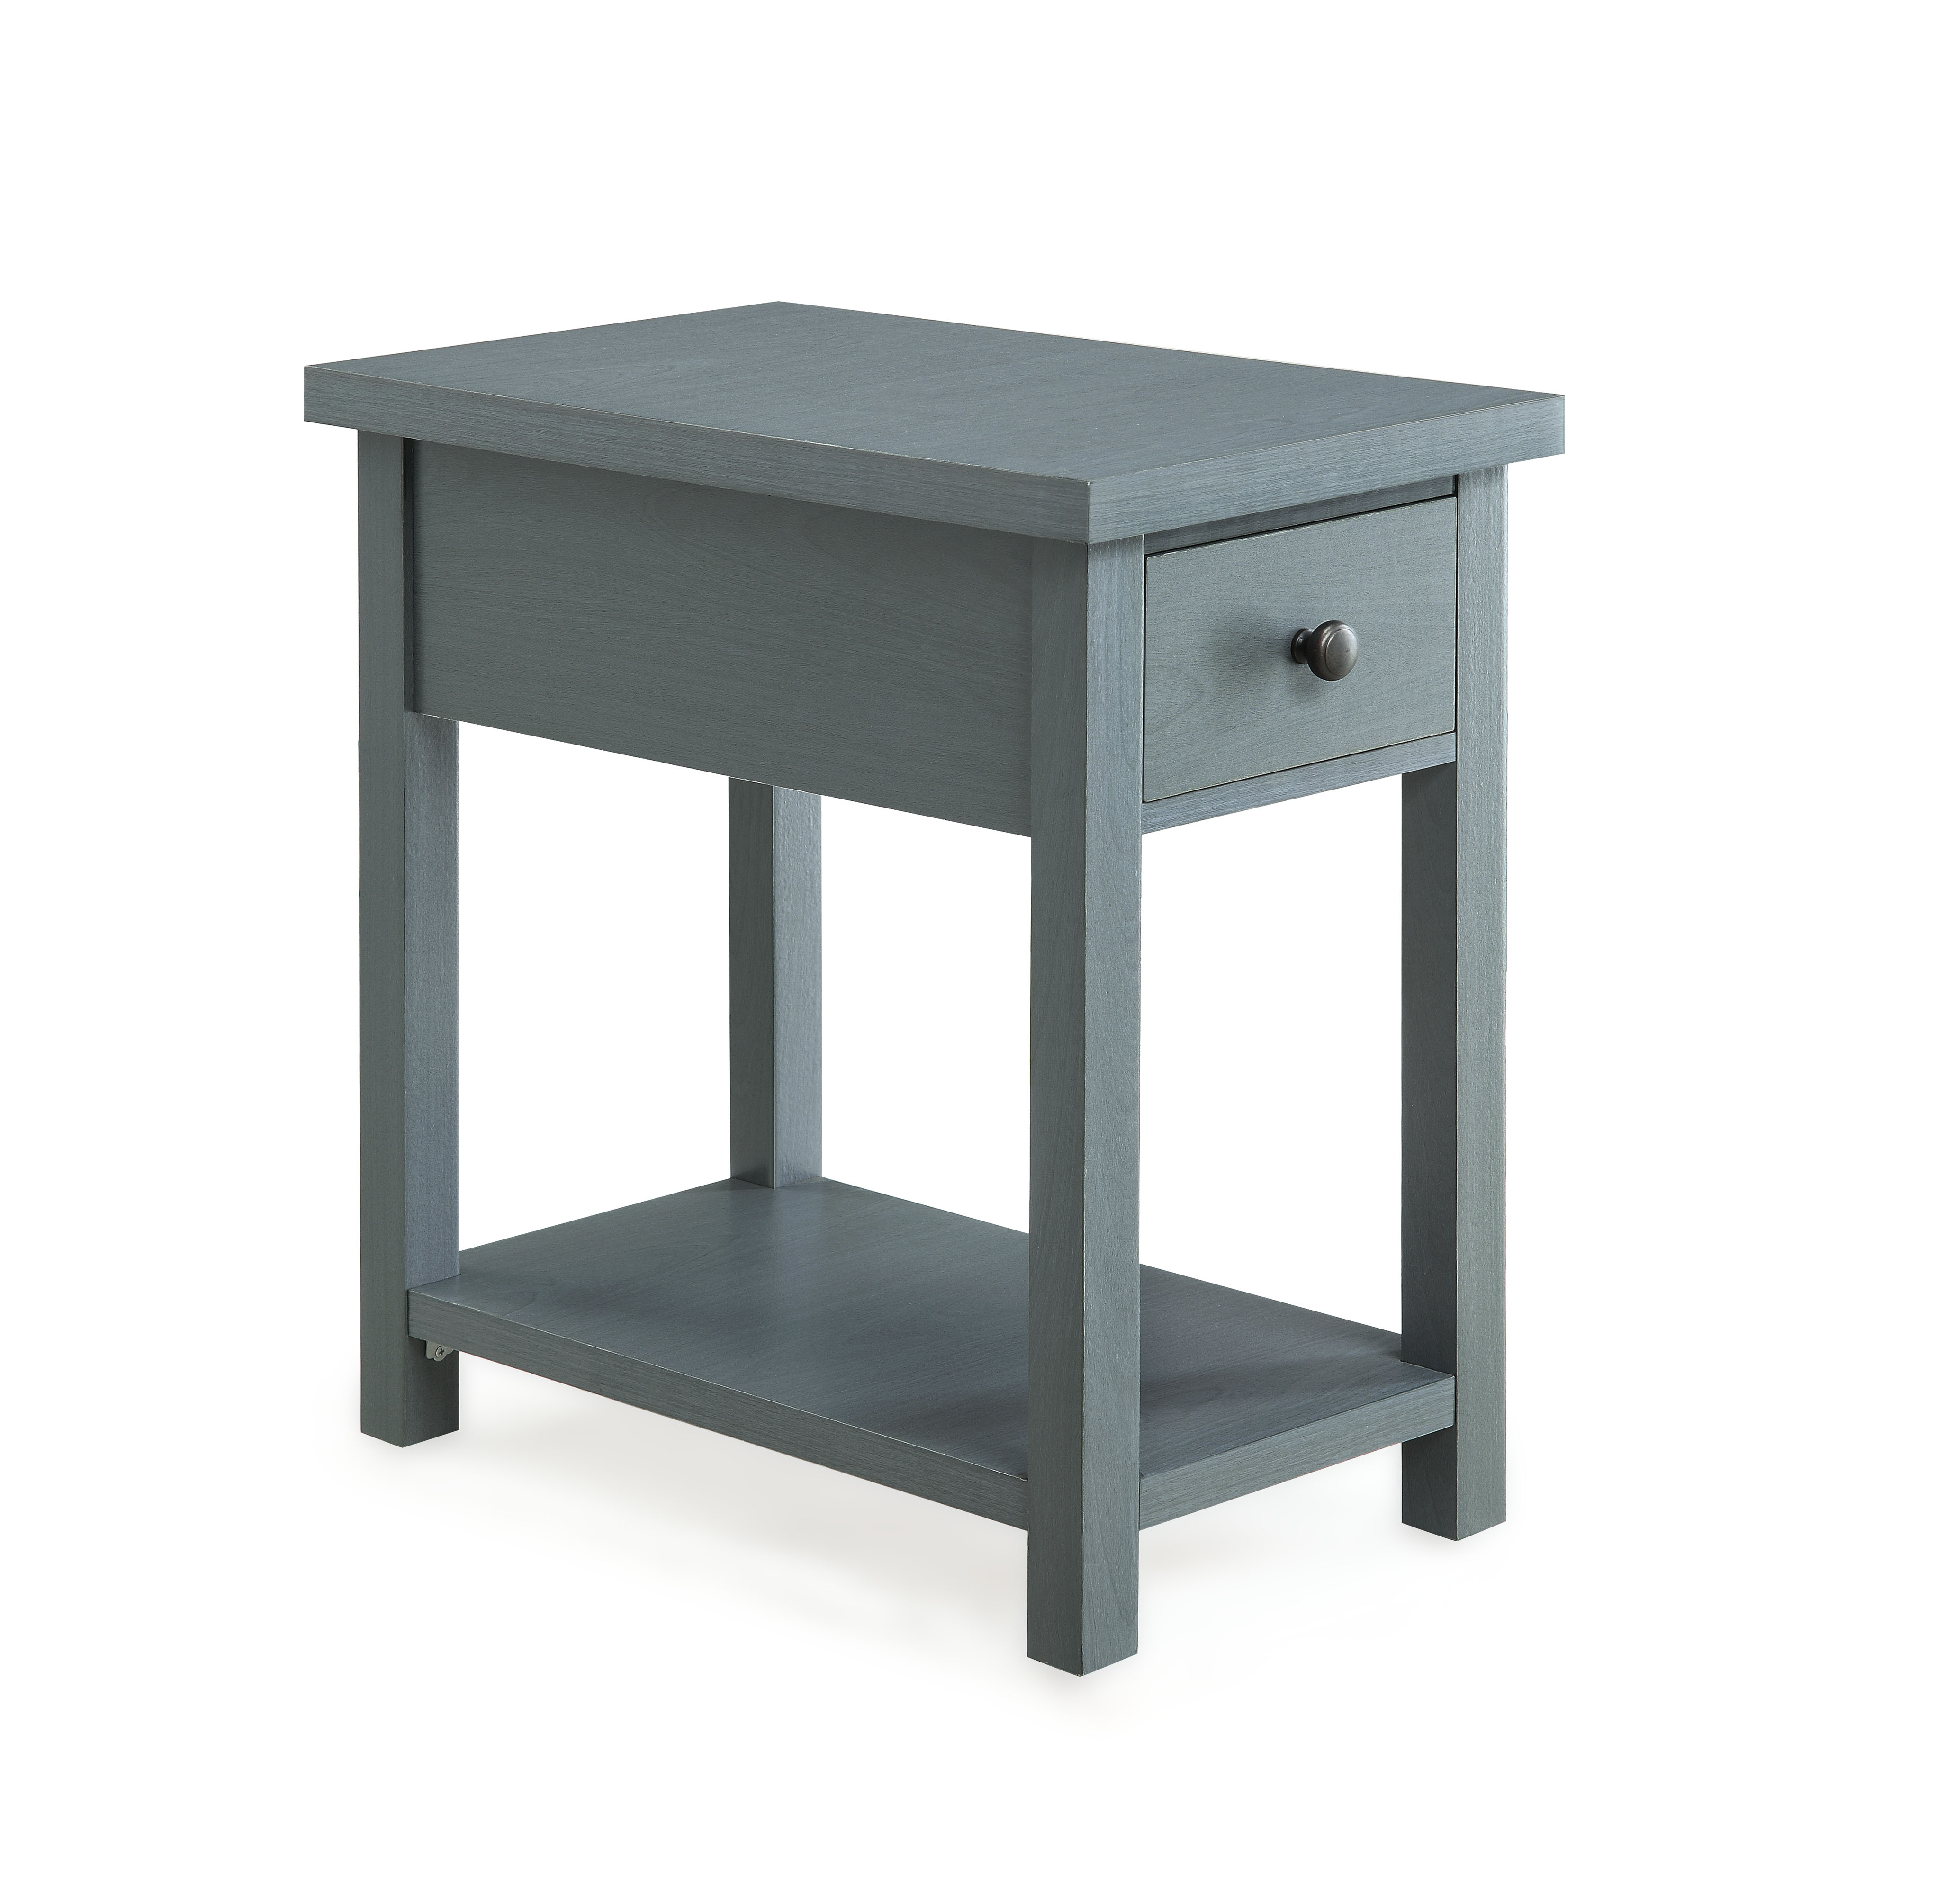 teak outdoor furniture the terrific awesome mainstays nightstand better homes and gardens oxford square end table with drawer dark gray oak available blue red portable dog crate